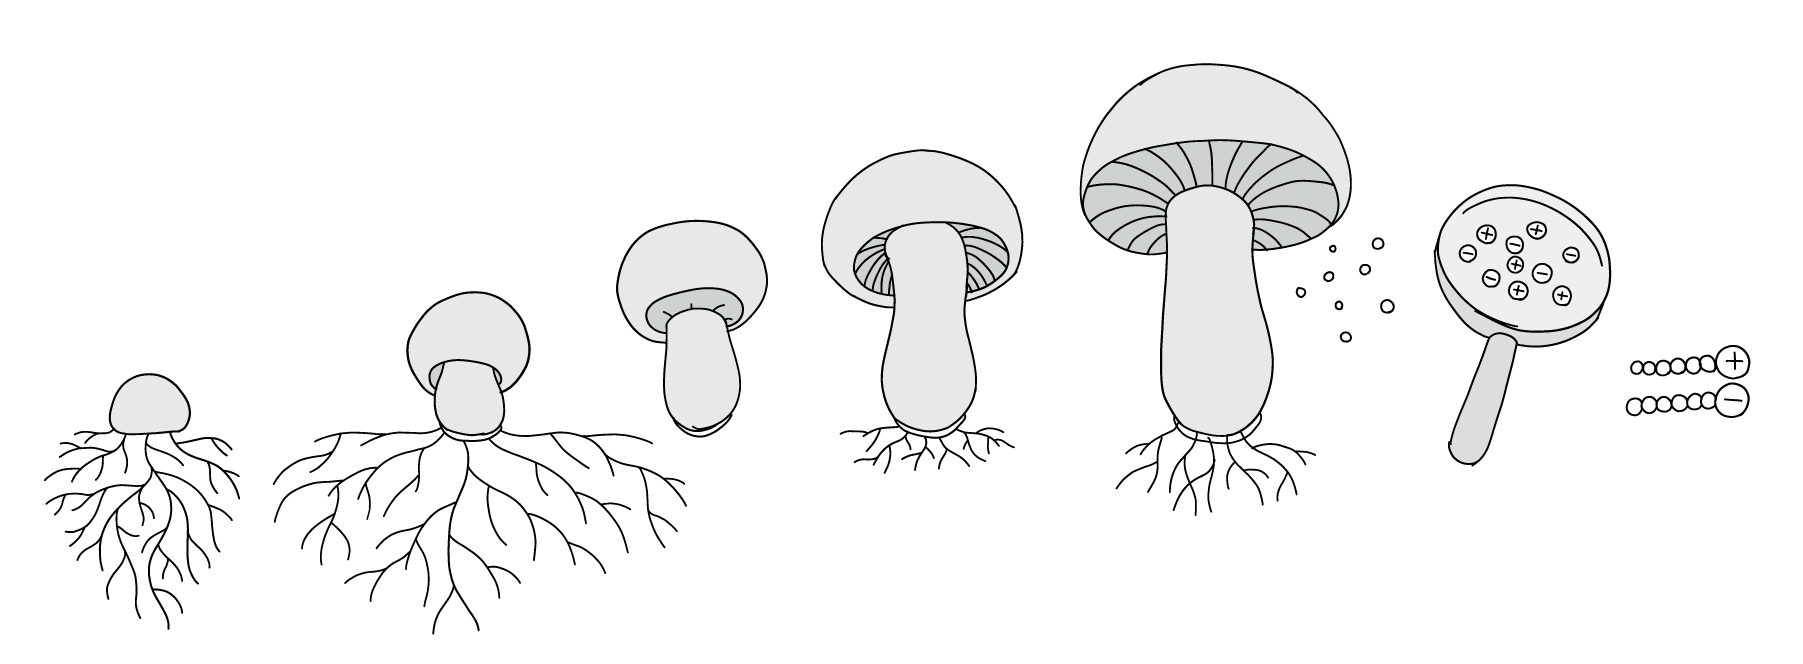 Lifecycle of mushrooms